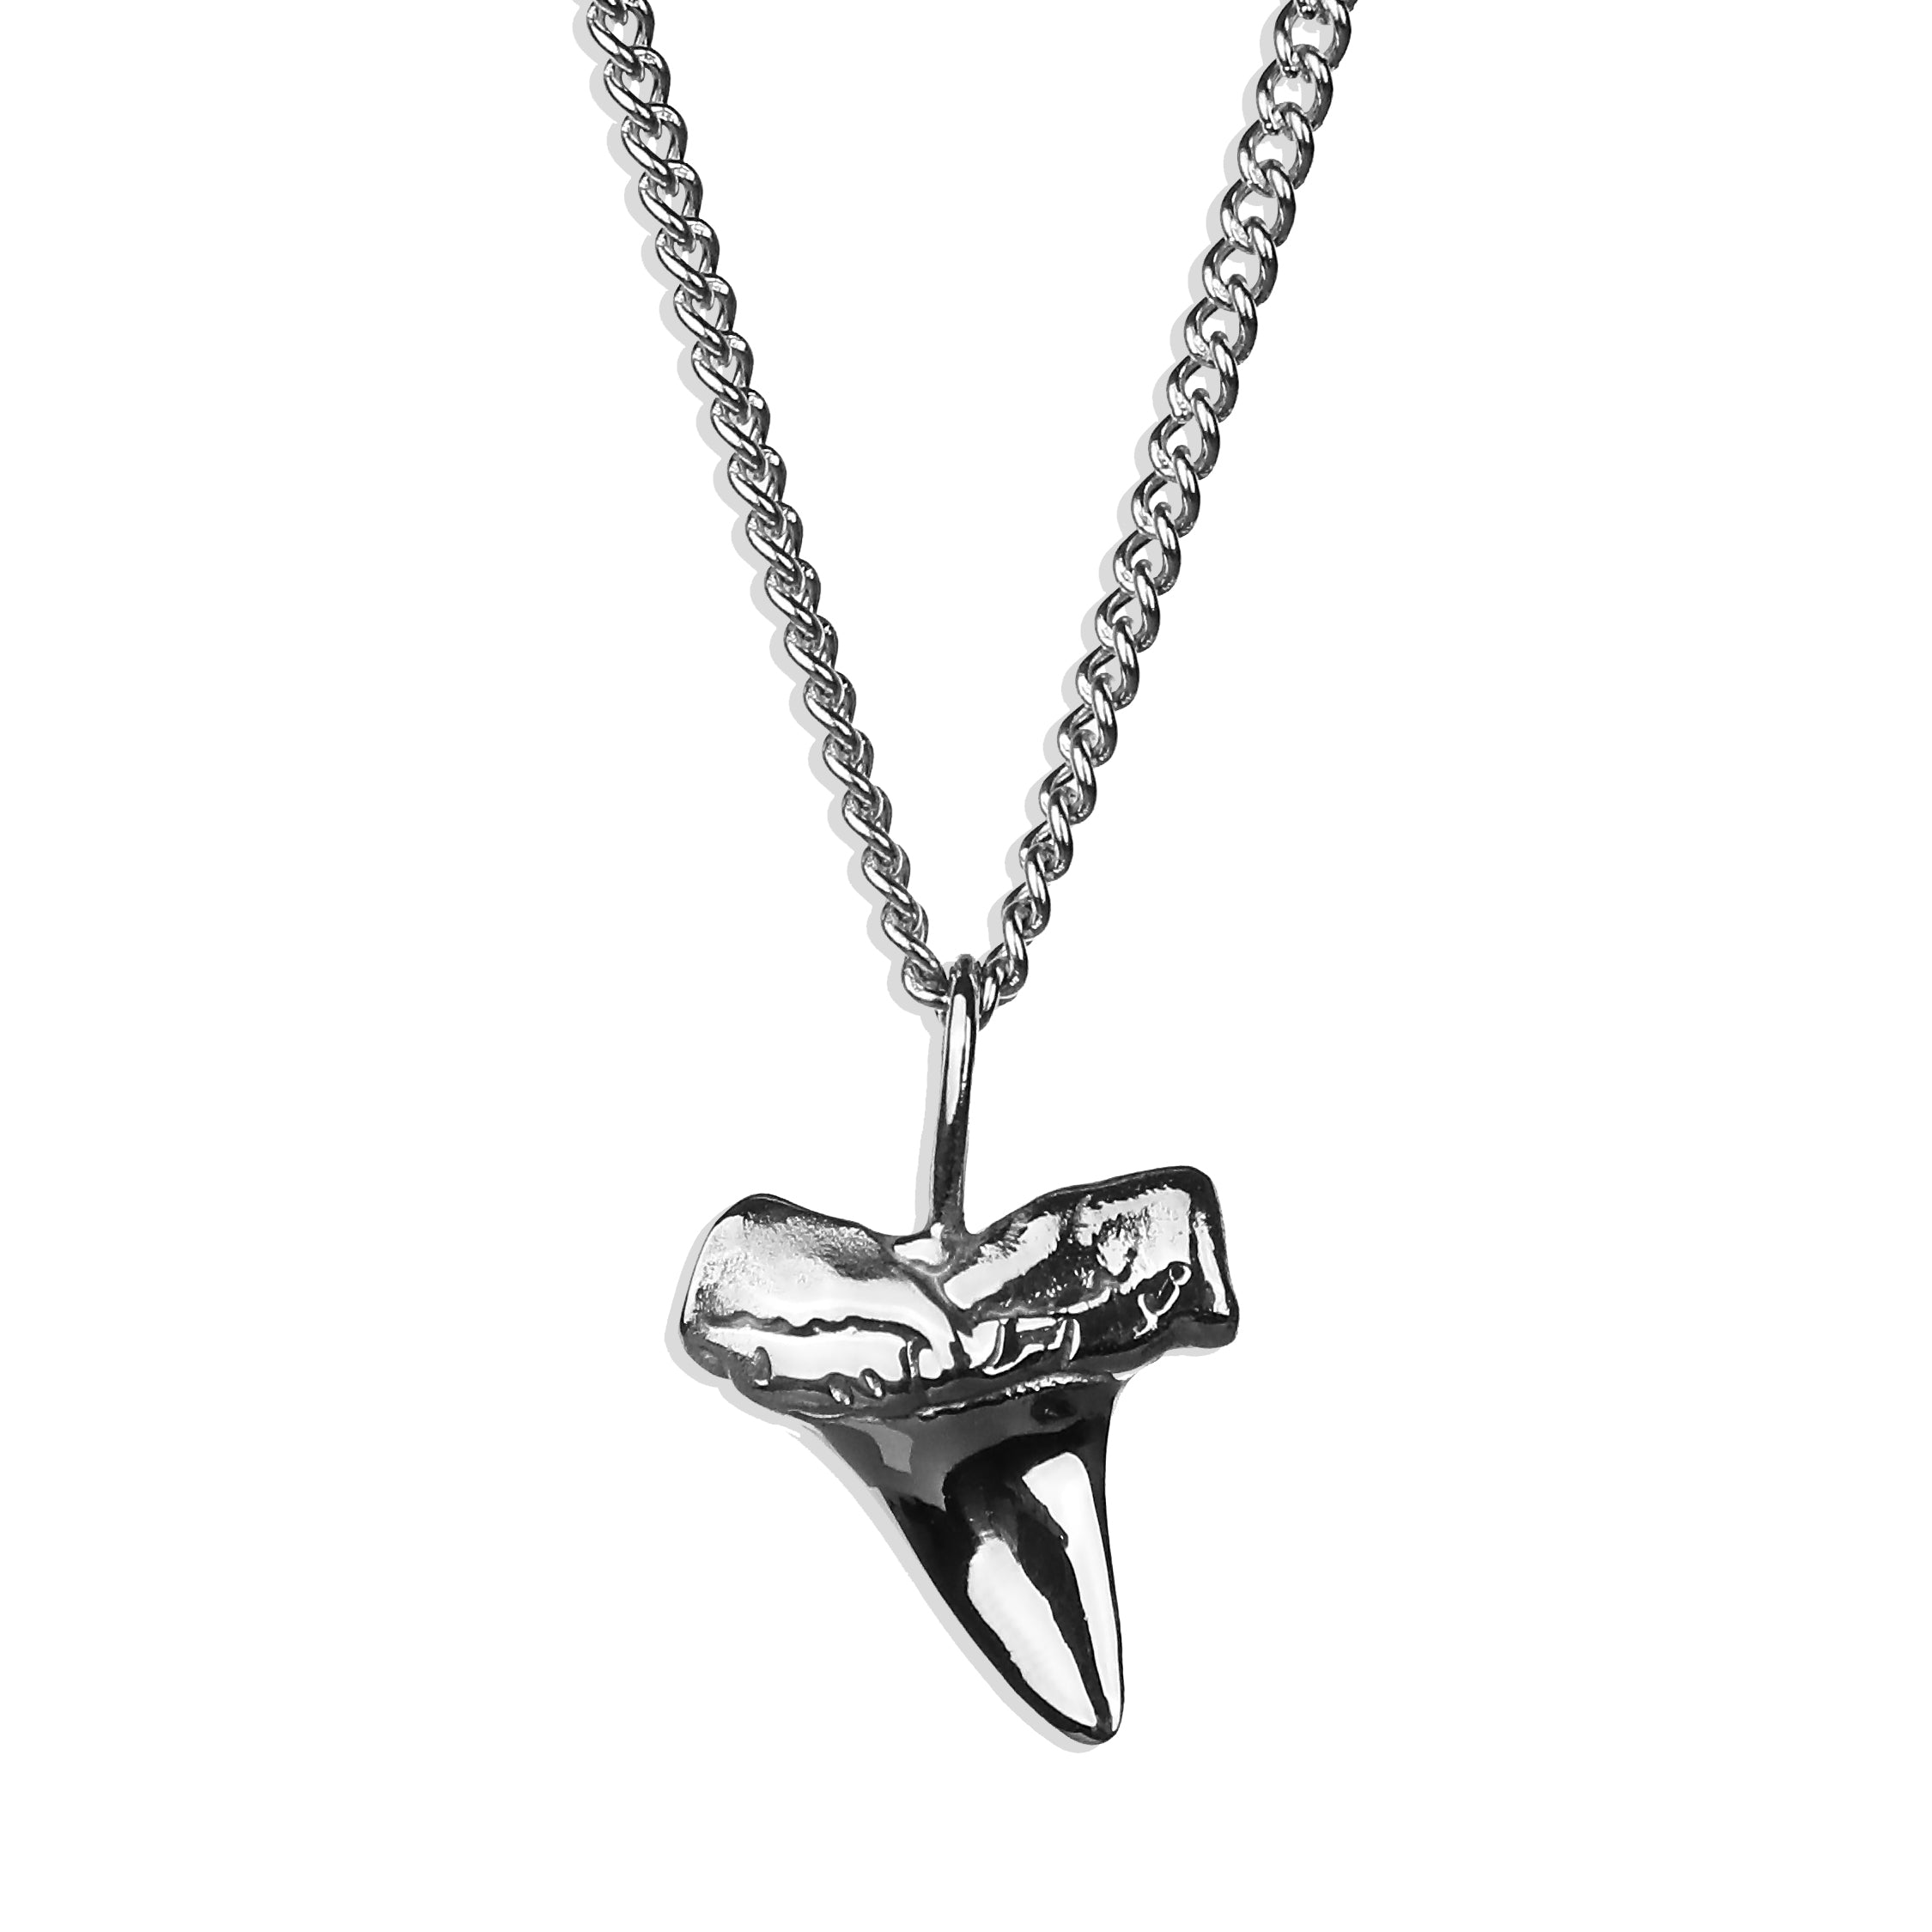 Jaws Necklace - Silver